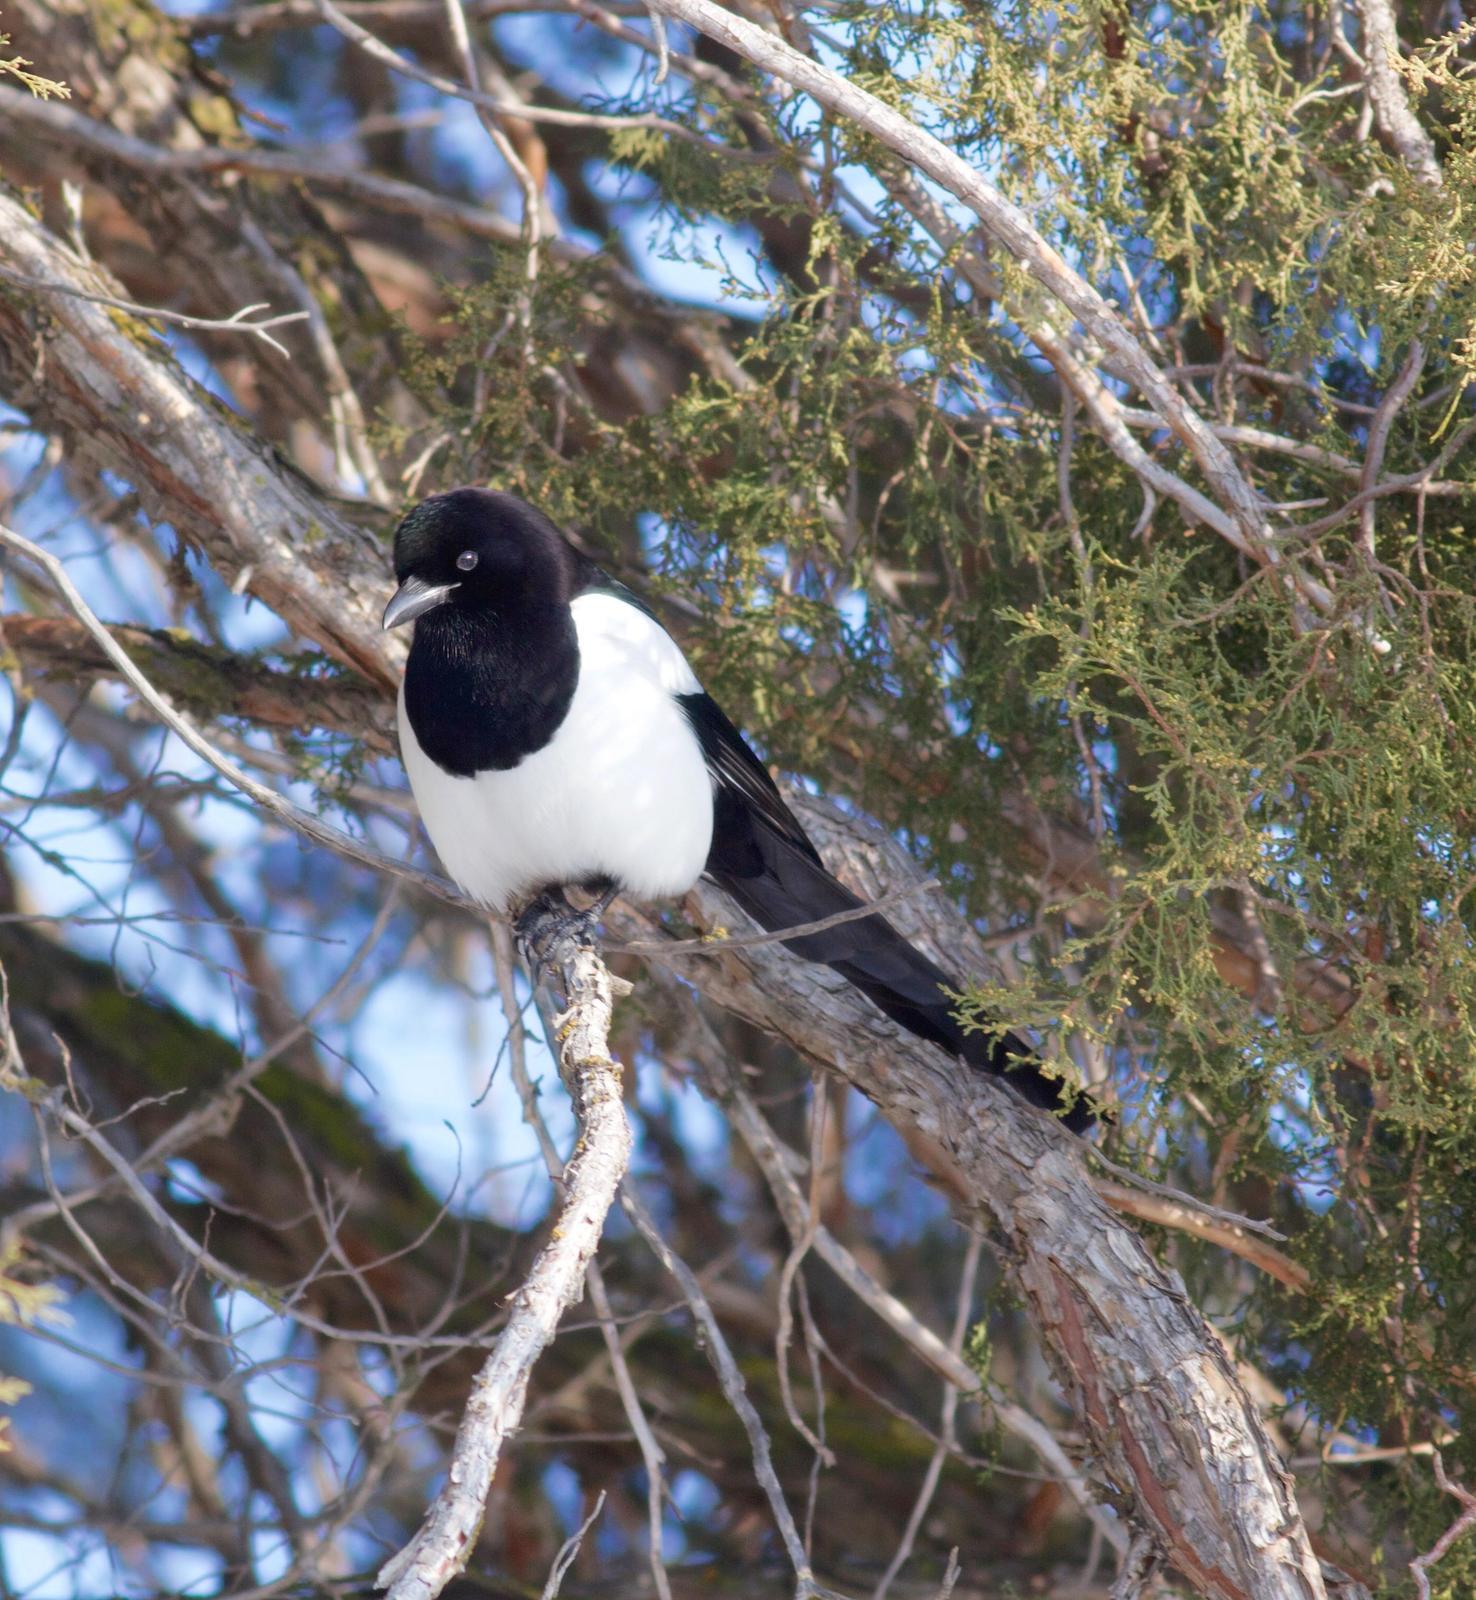 Black-billed Magpie Photo by Kathryn Keith